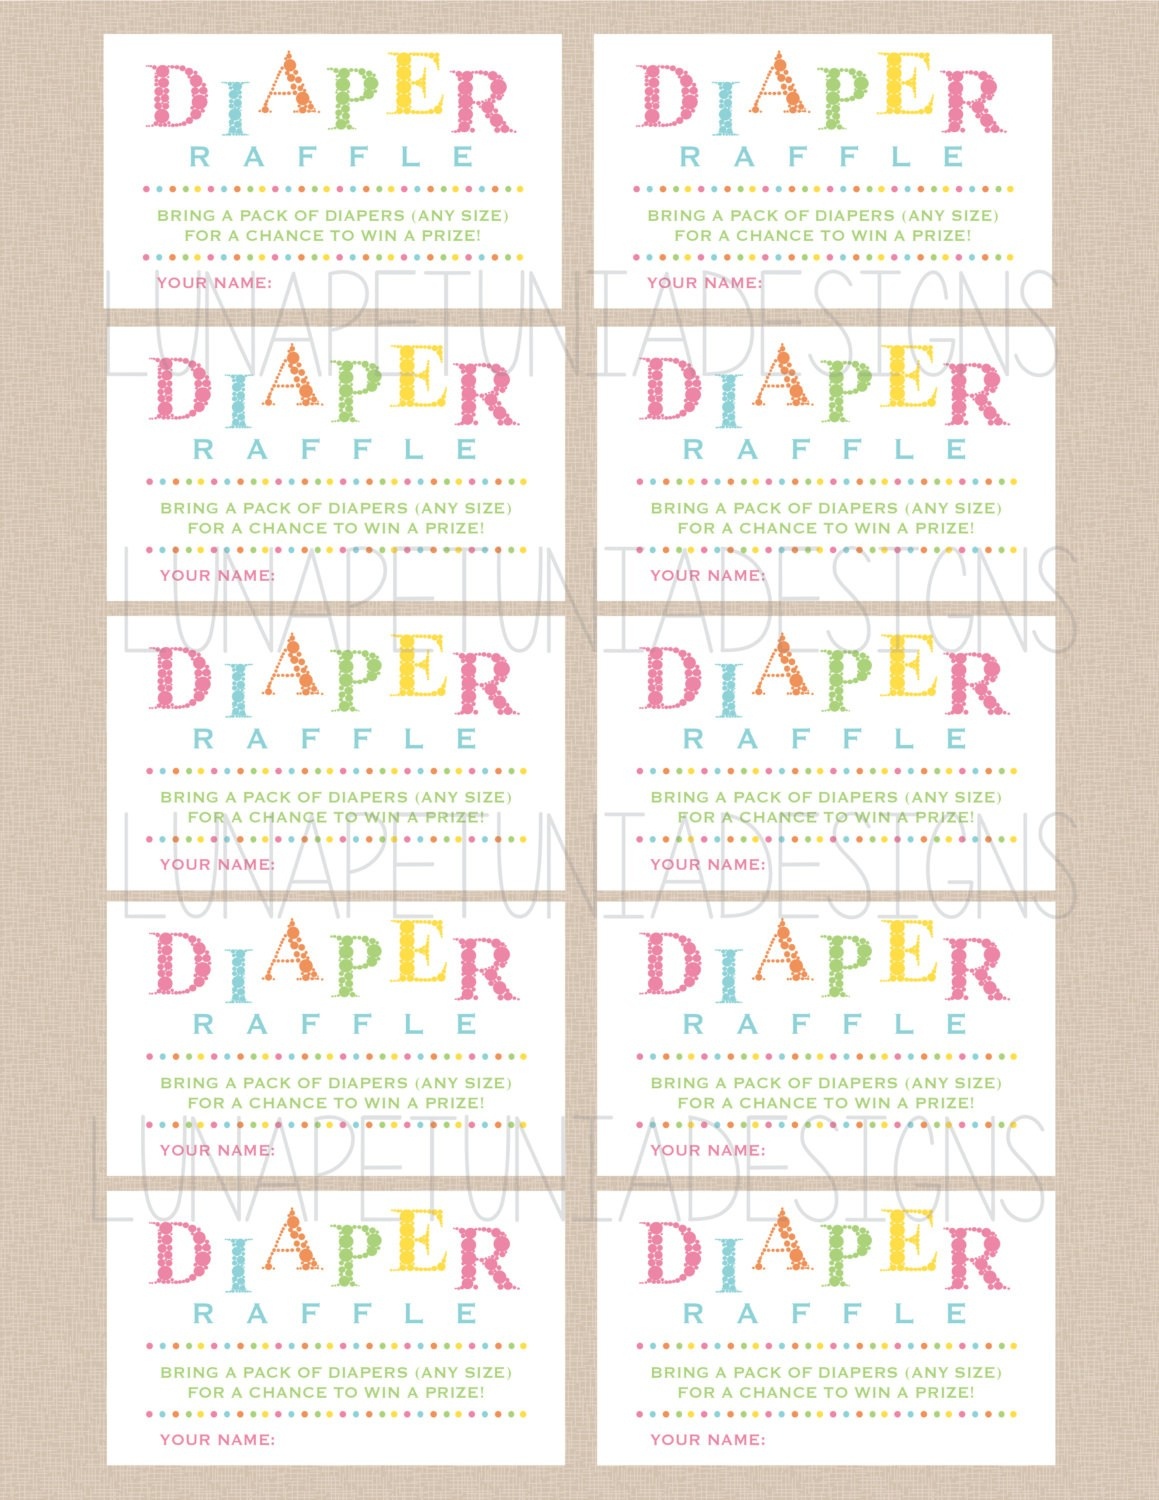 Review Free Printable Diaper Raffle Tickets For Baby Shower - Ideas - Free Printable Diaper Raffle Ticket Template Download